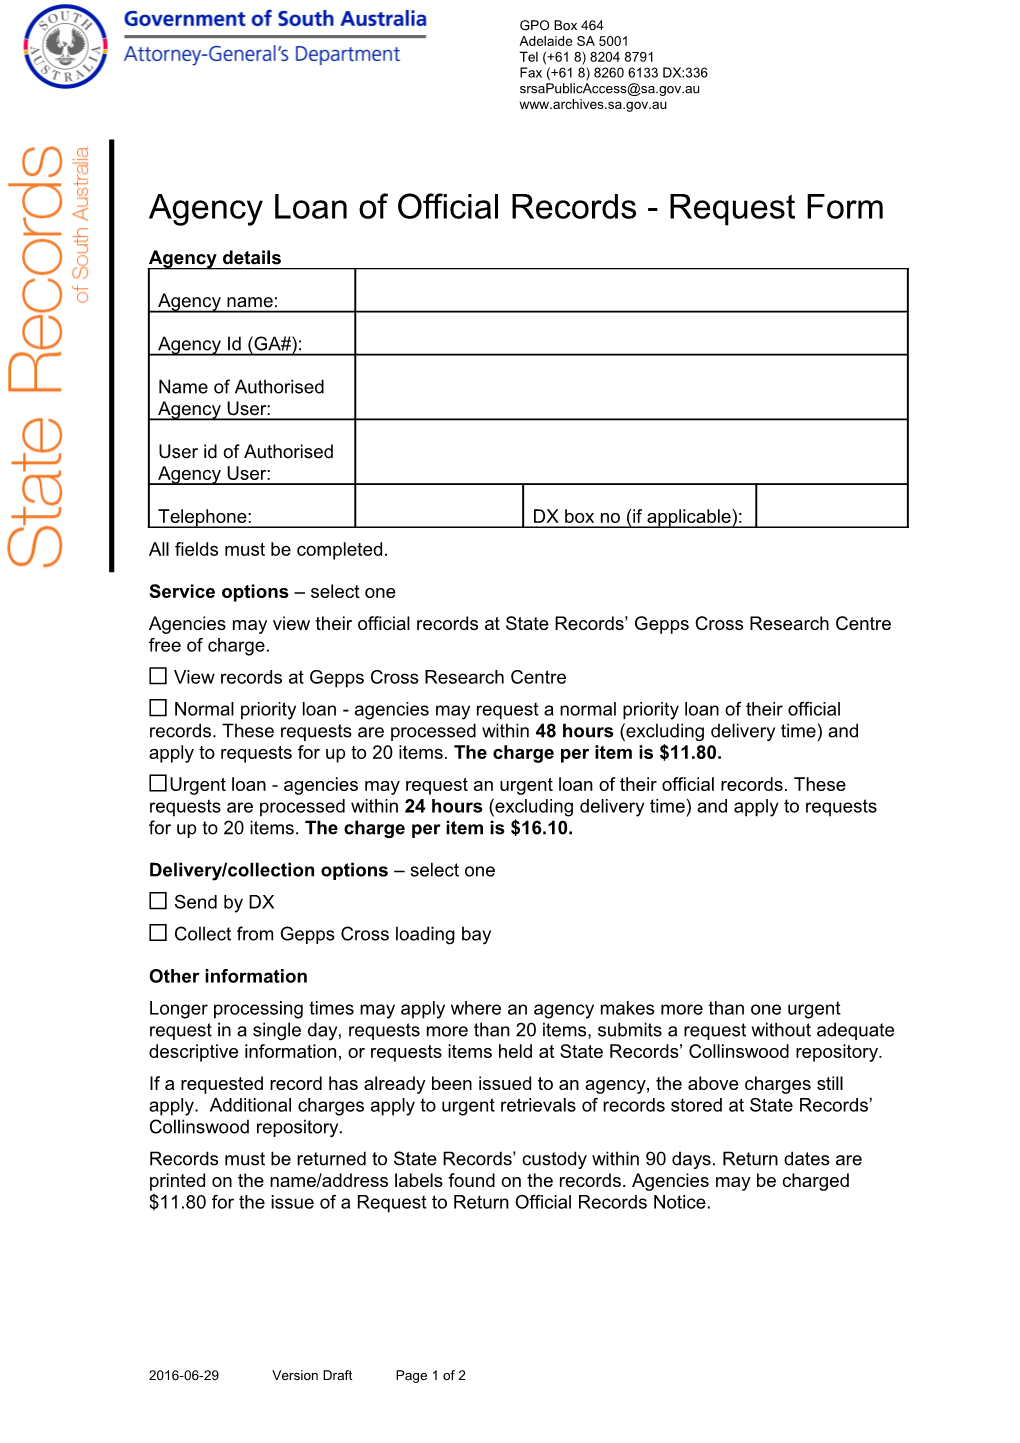 20160629 Agency Loan of Official Records - Request Form Draft V02